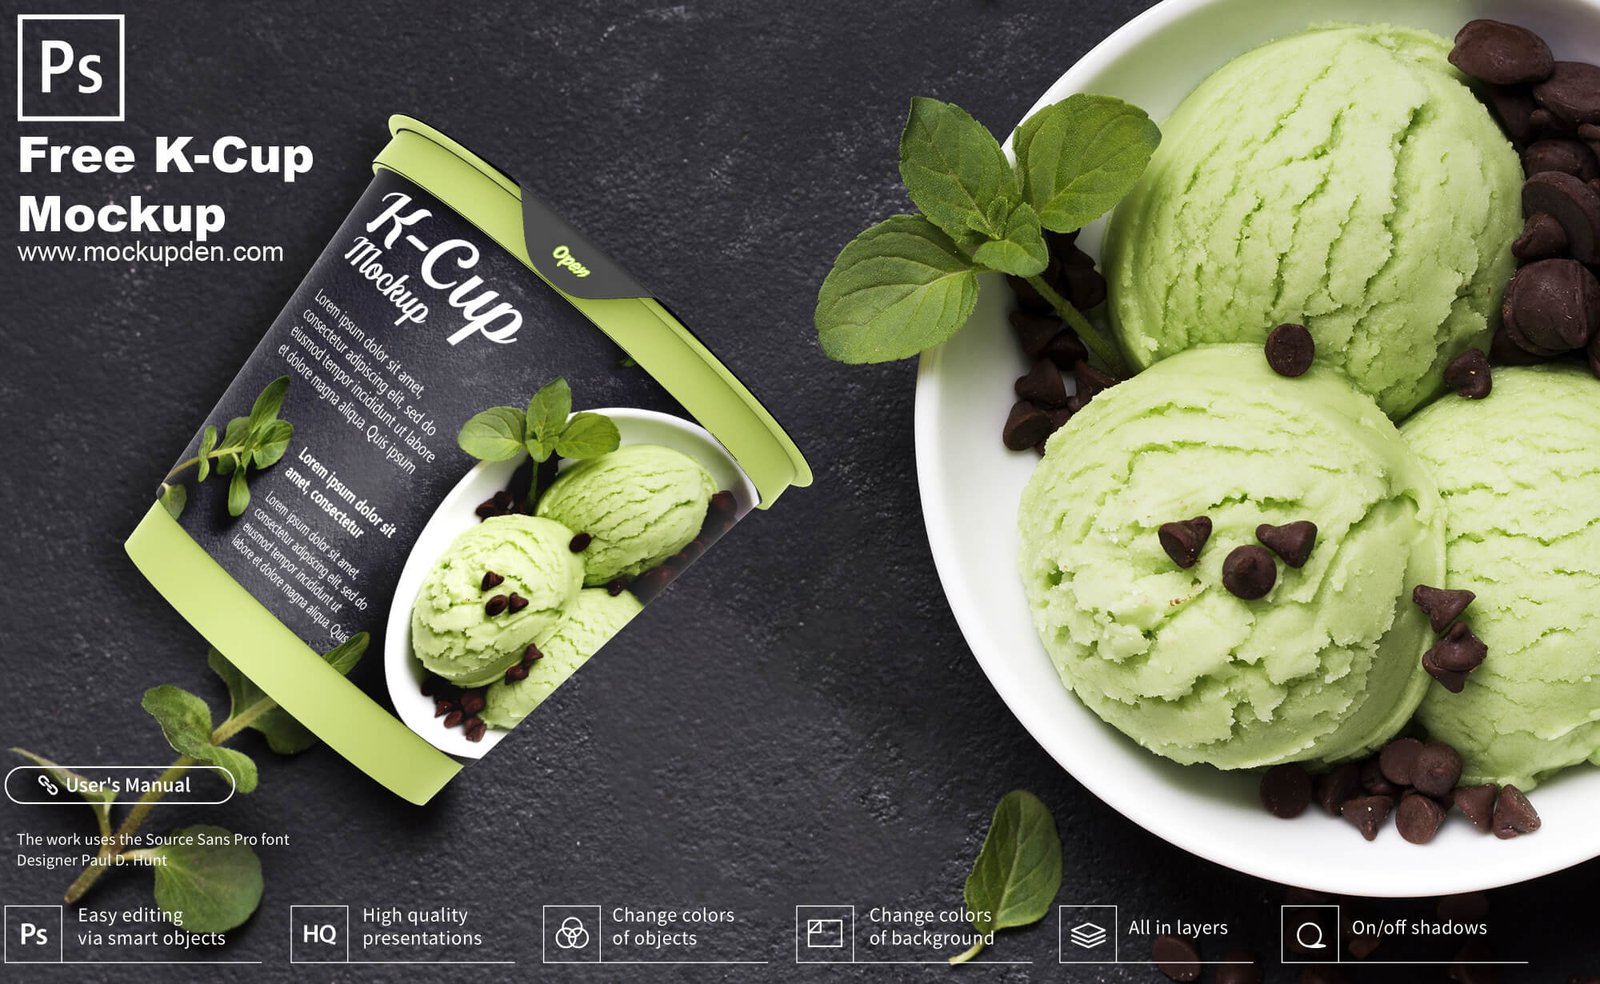 Free K-Cup Mockup PSD Template